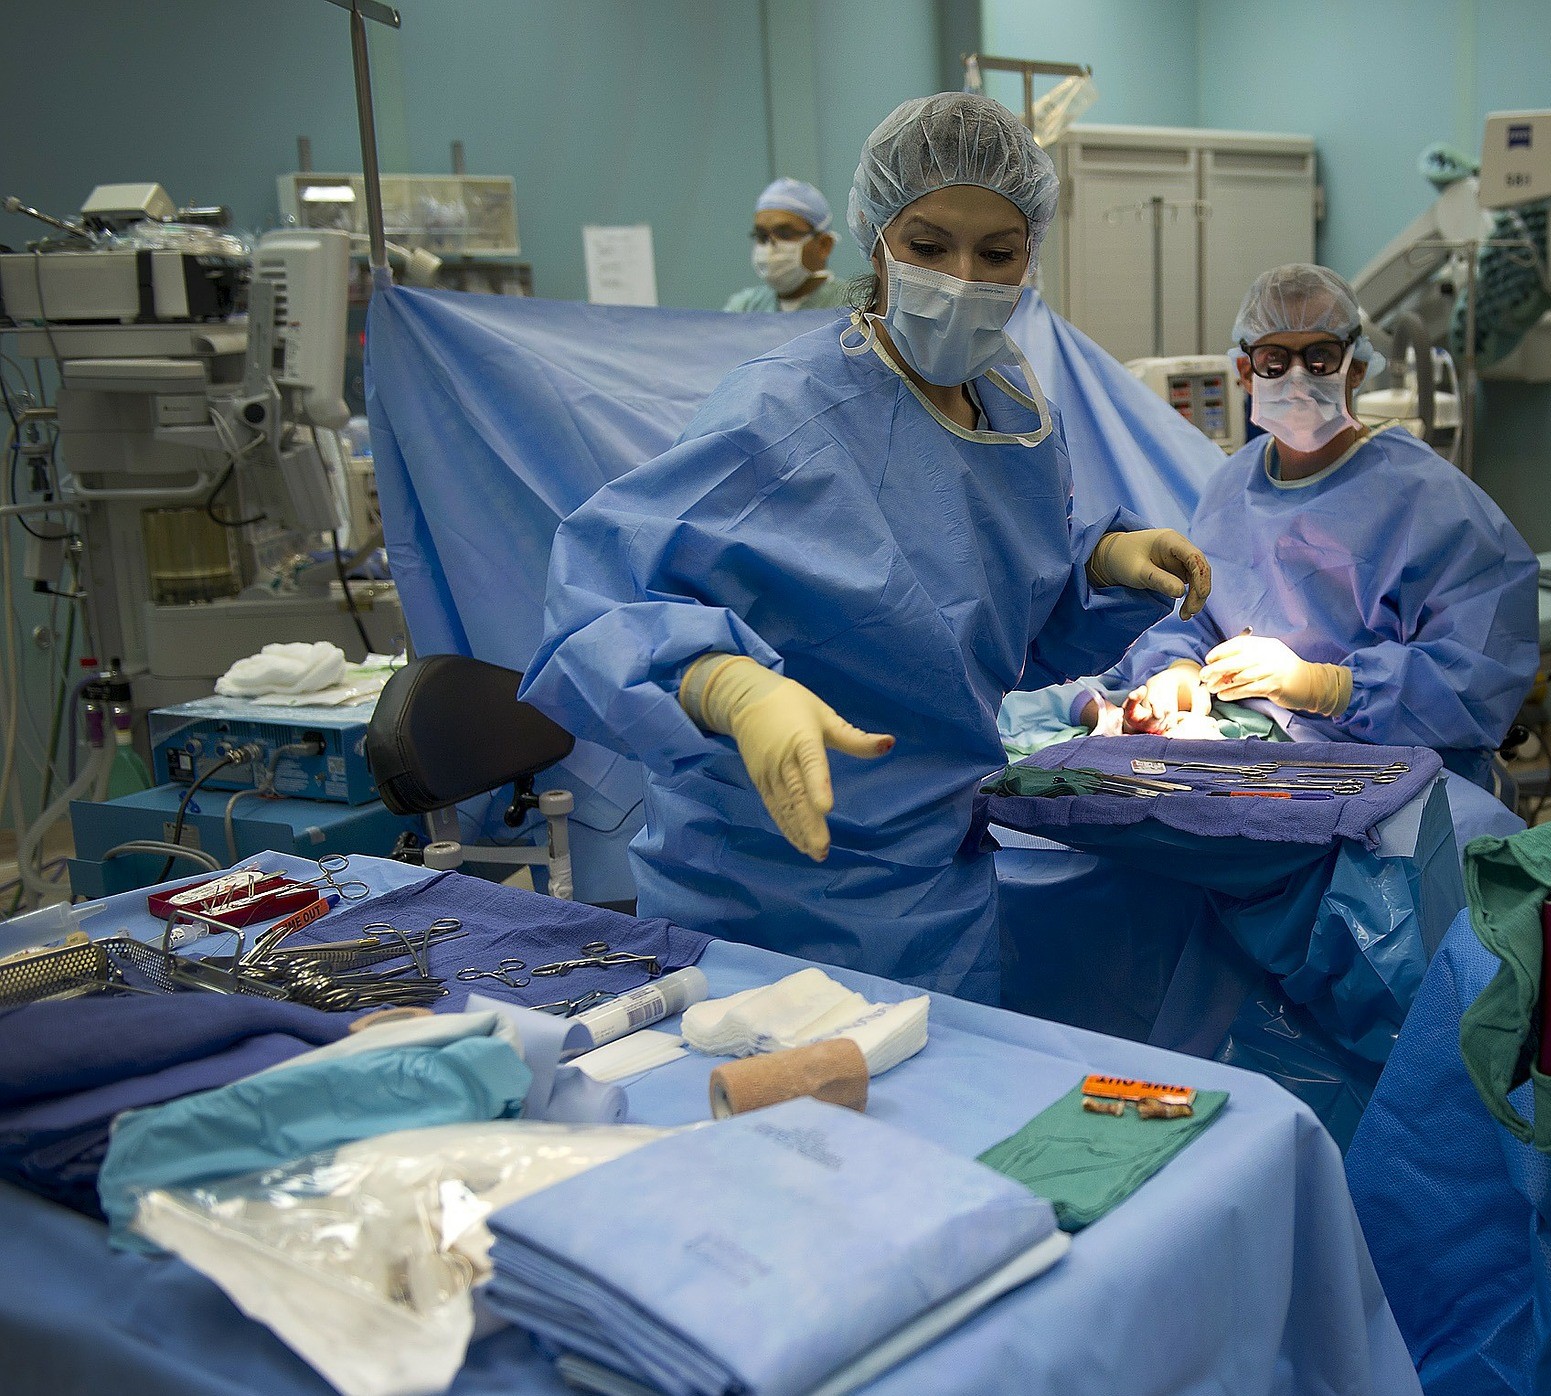 Nurses assisting with surgery on a patient